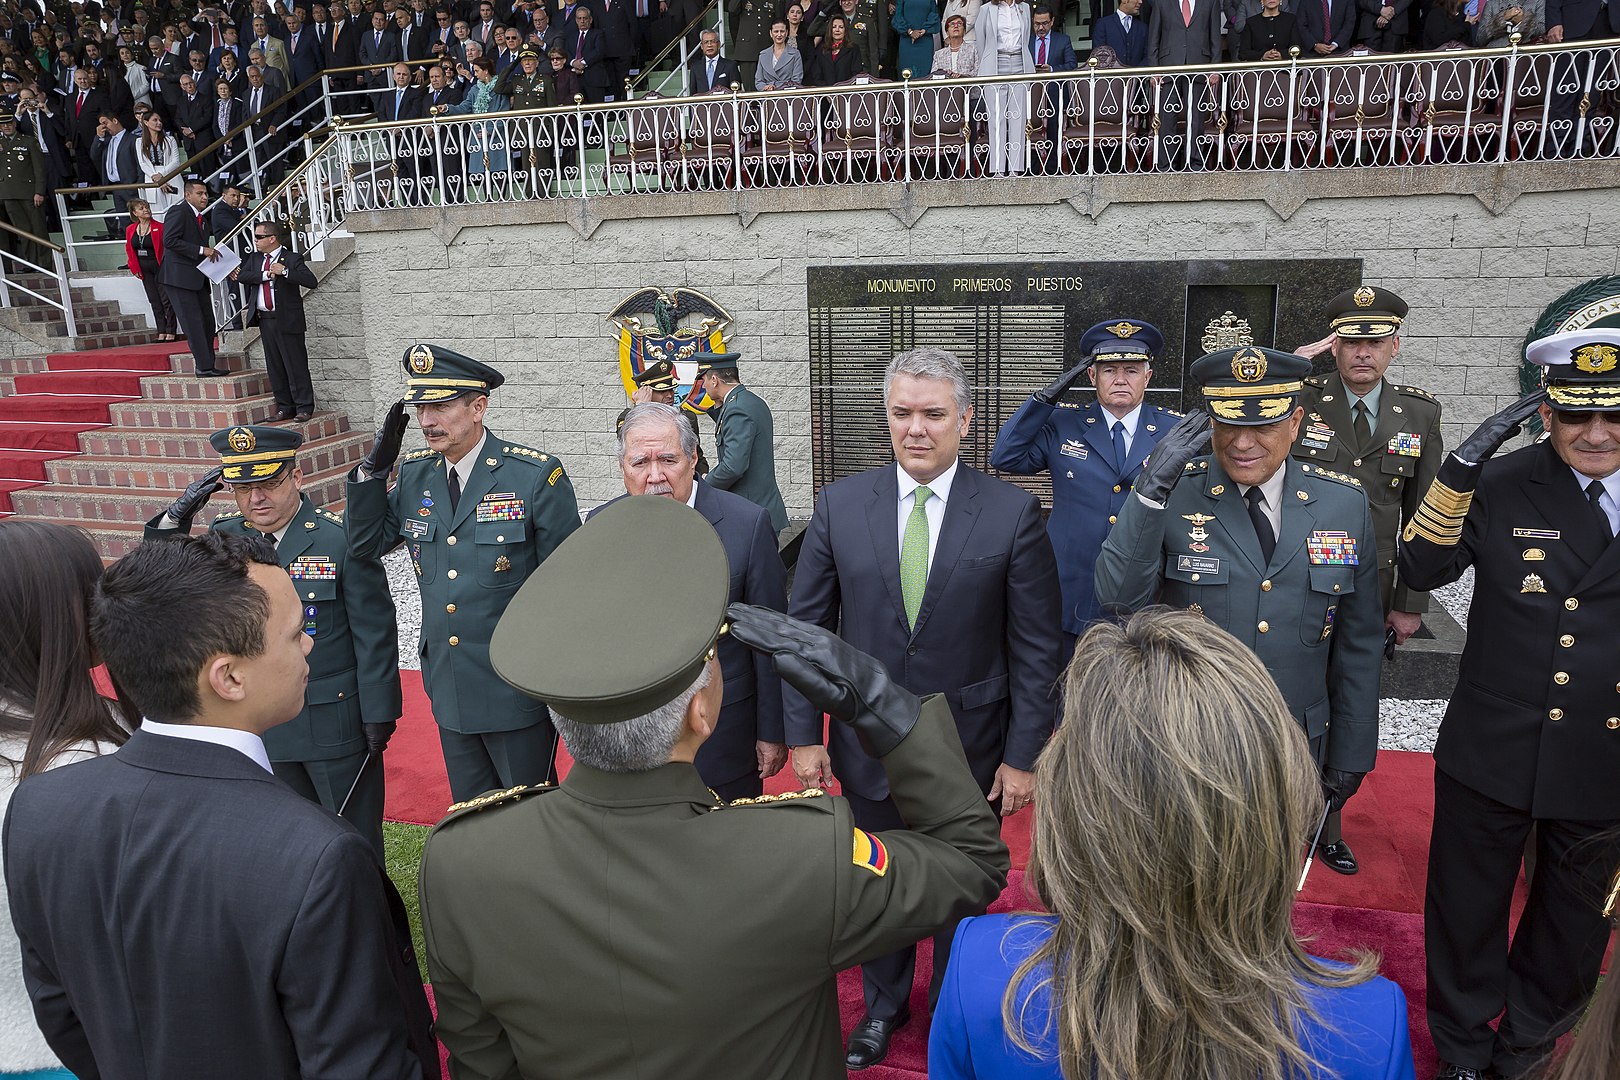 President Duque in front of soliders